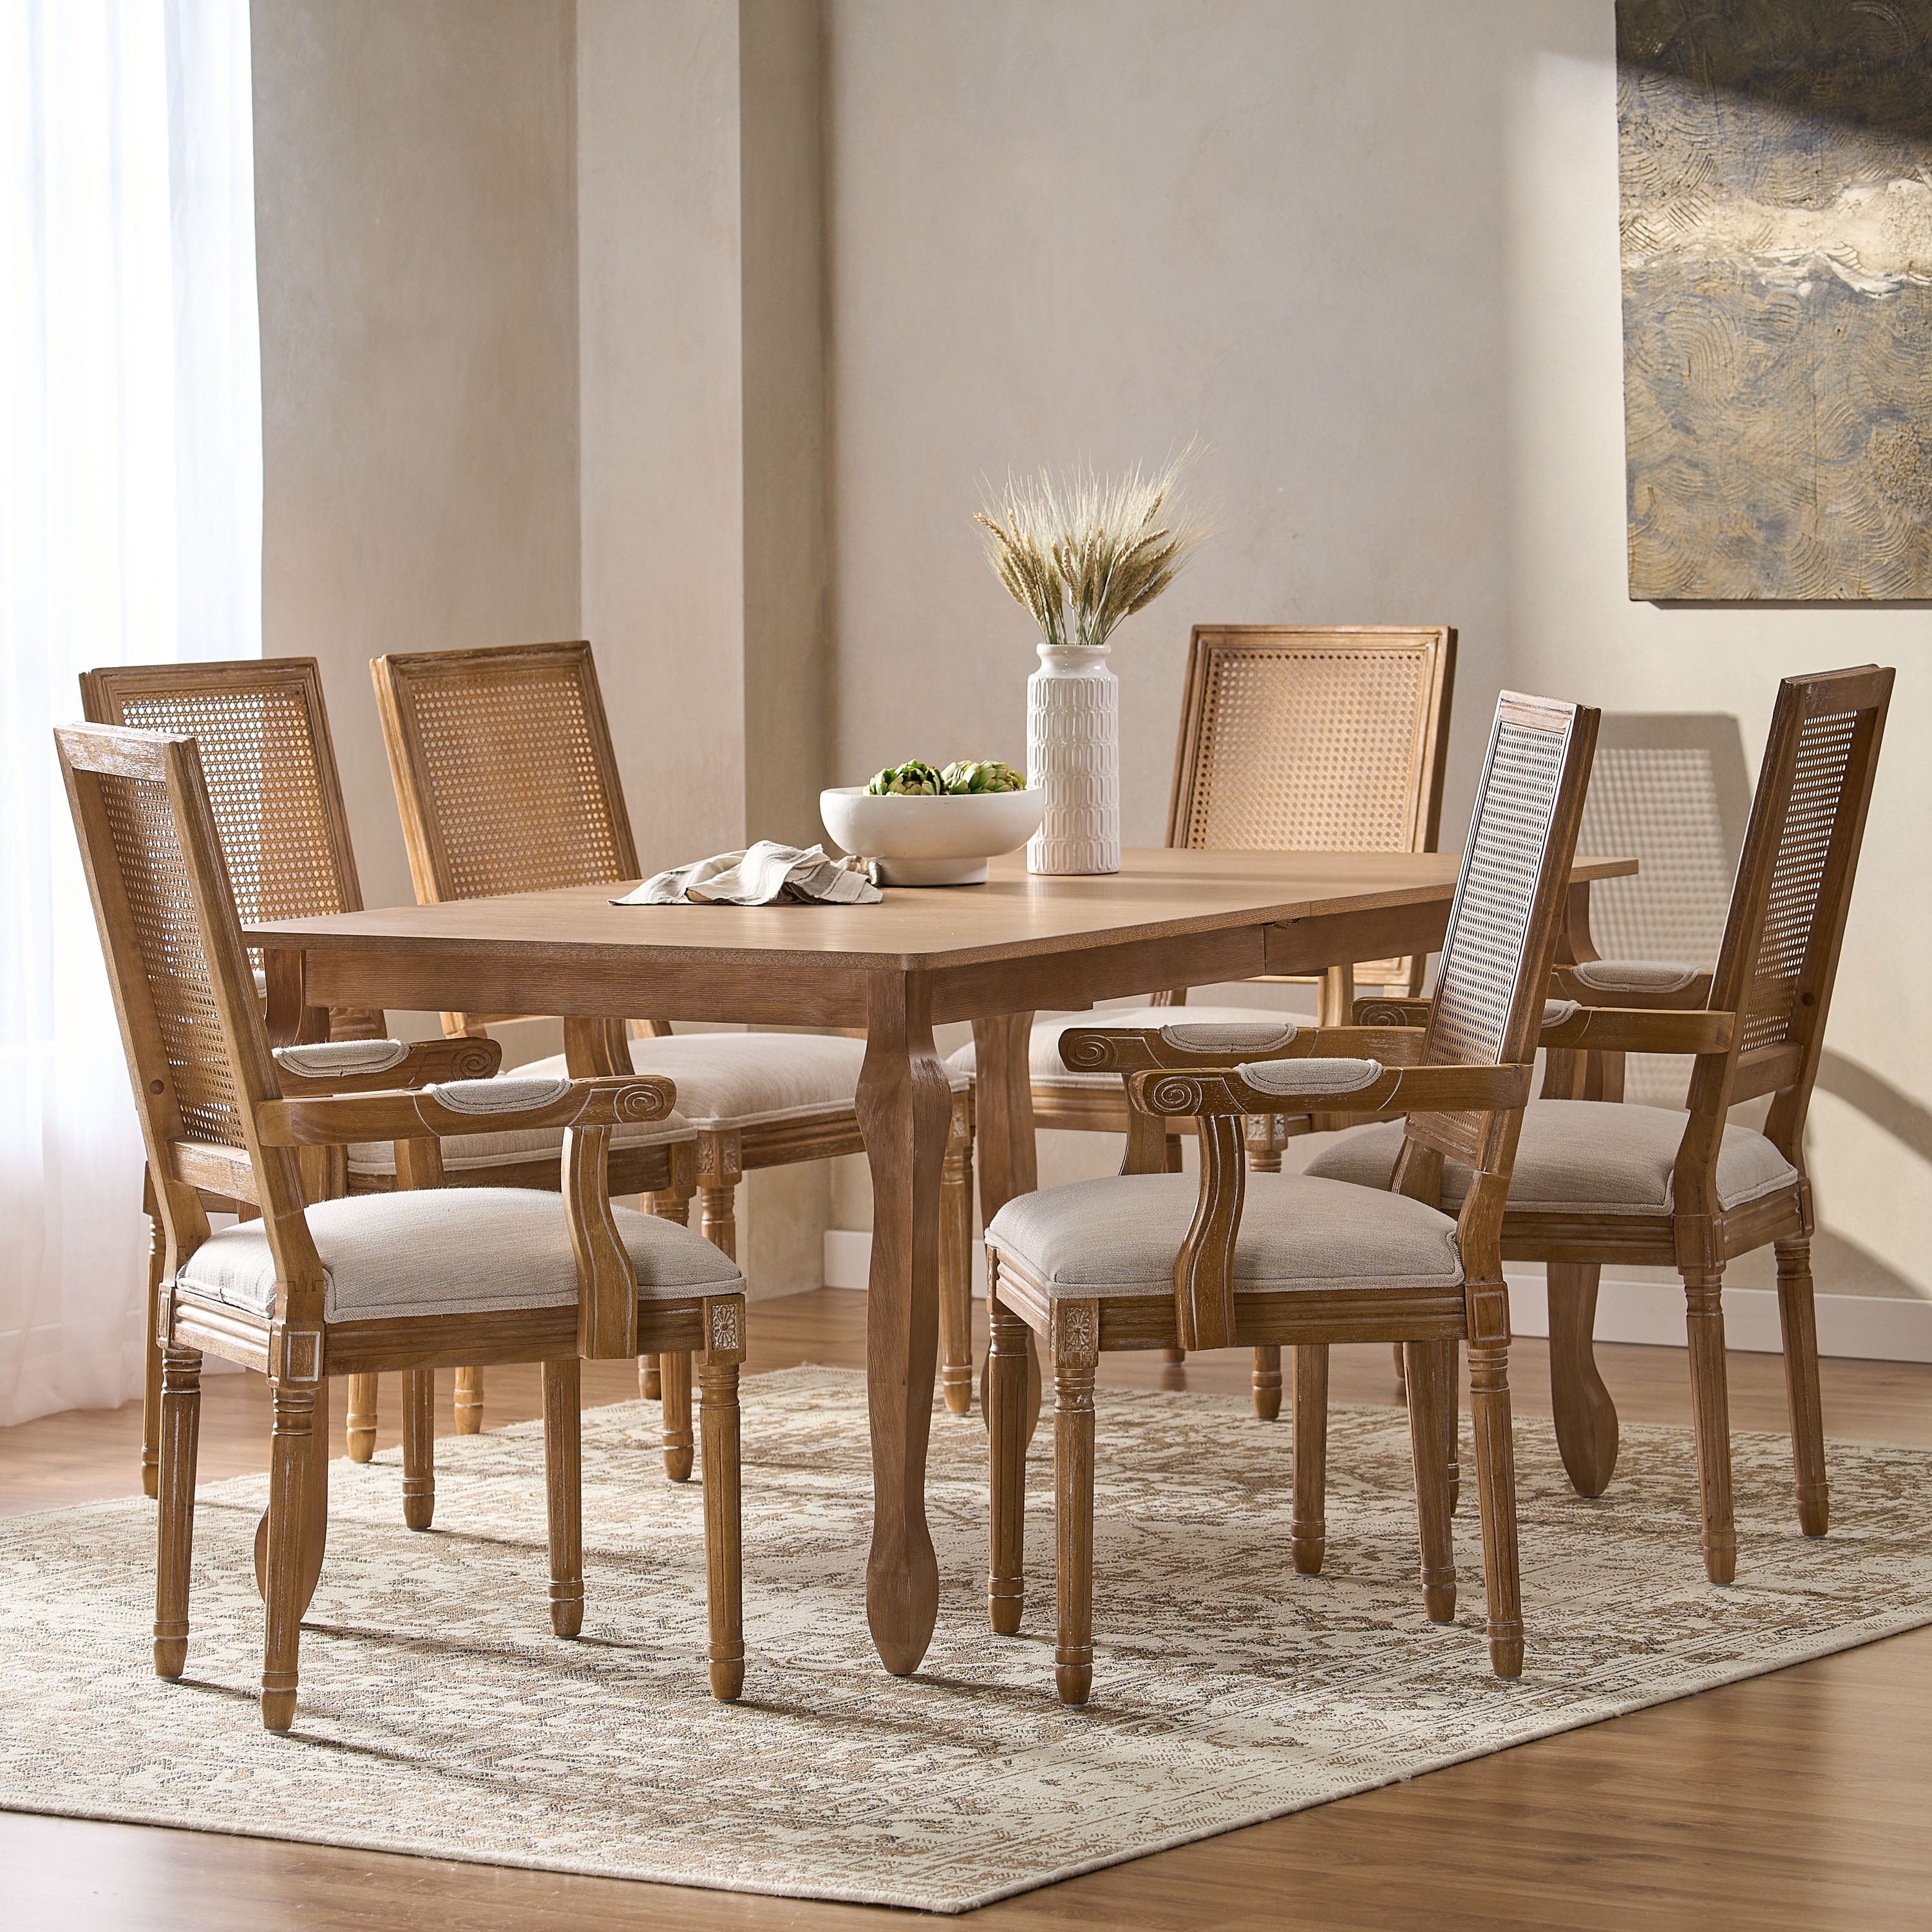 COLAMY French Country Dining Chairs Set of 4, Upholstered